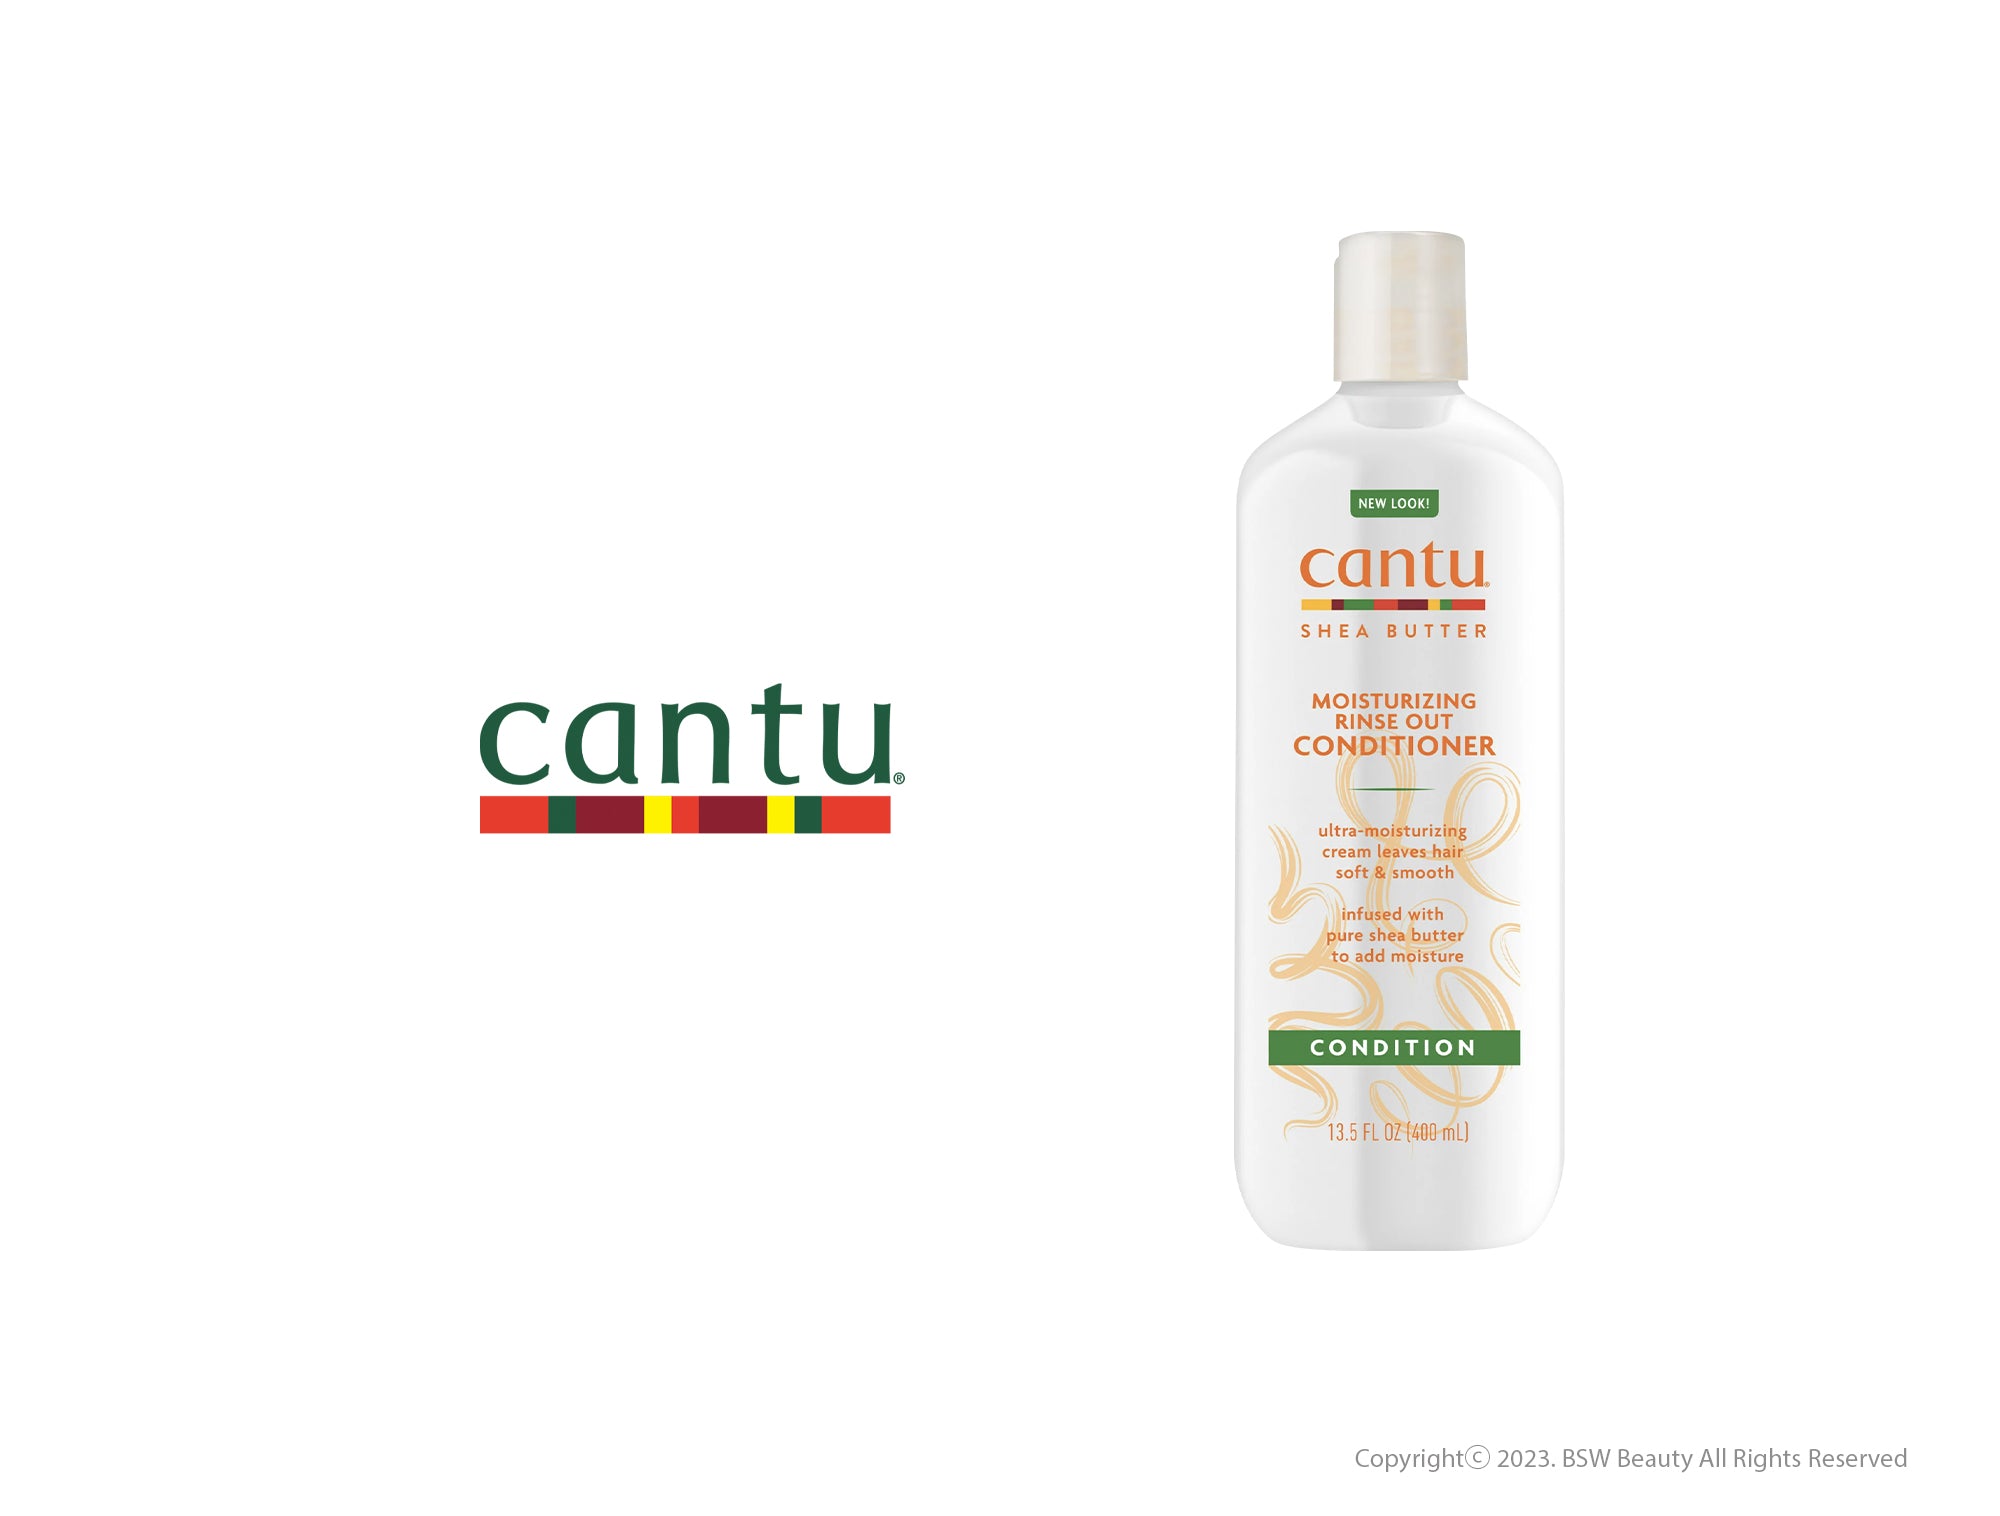 CANTU SHEA BUTTER MOISTURIZING RINSE OUT CONDITIONER 13.5oz